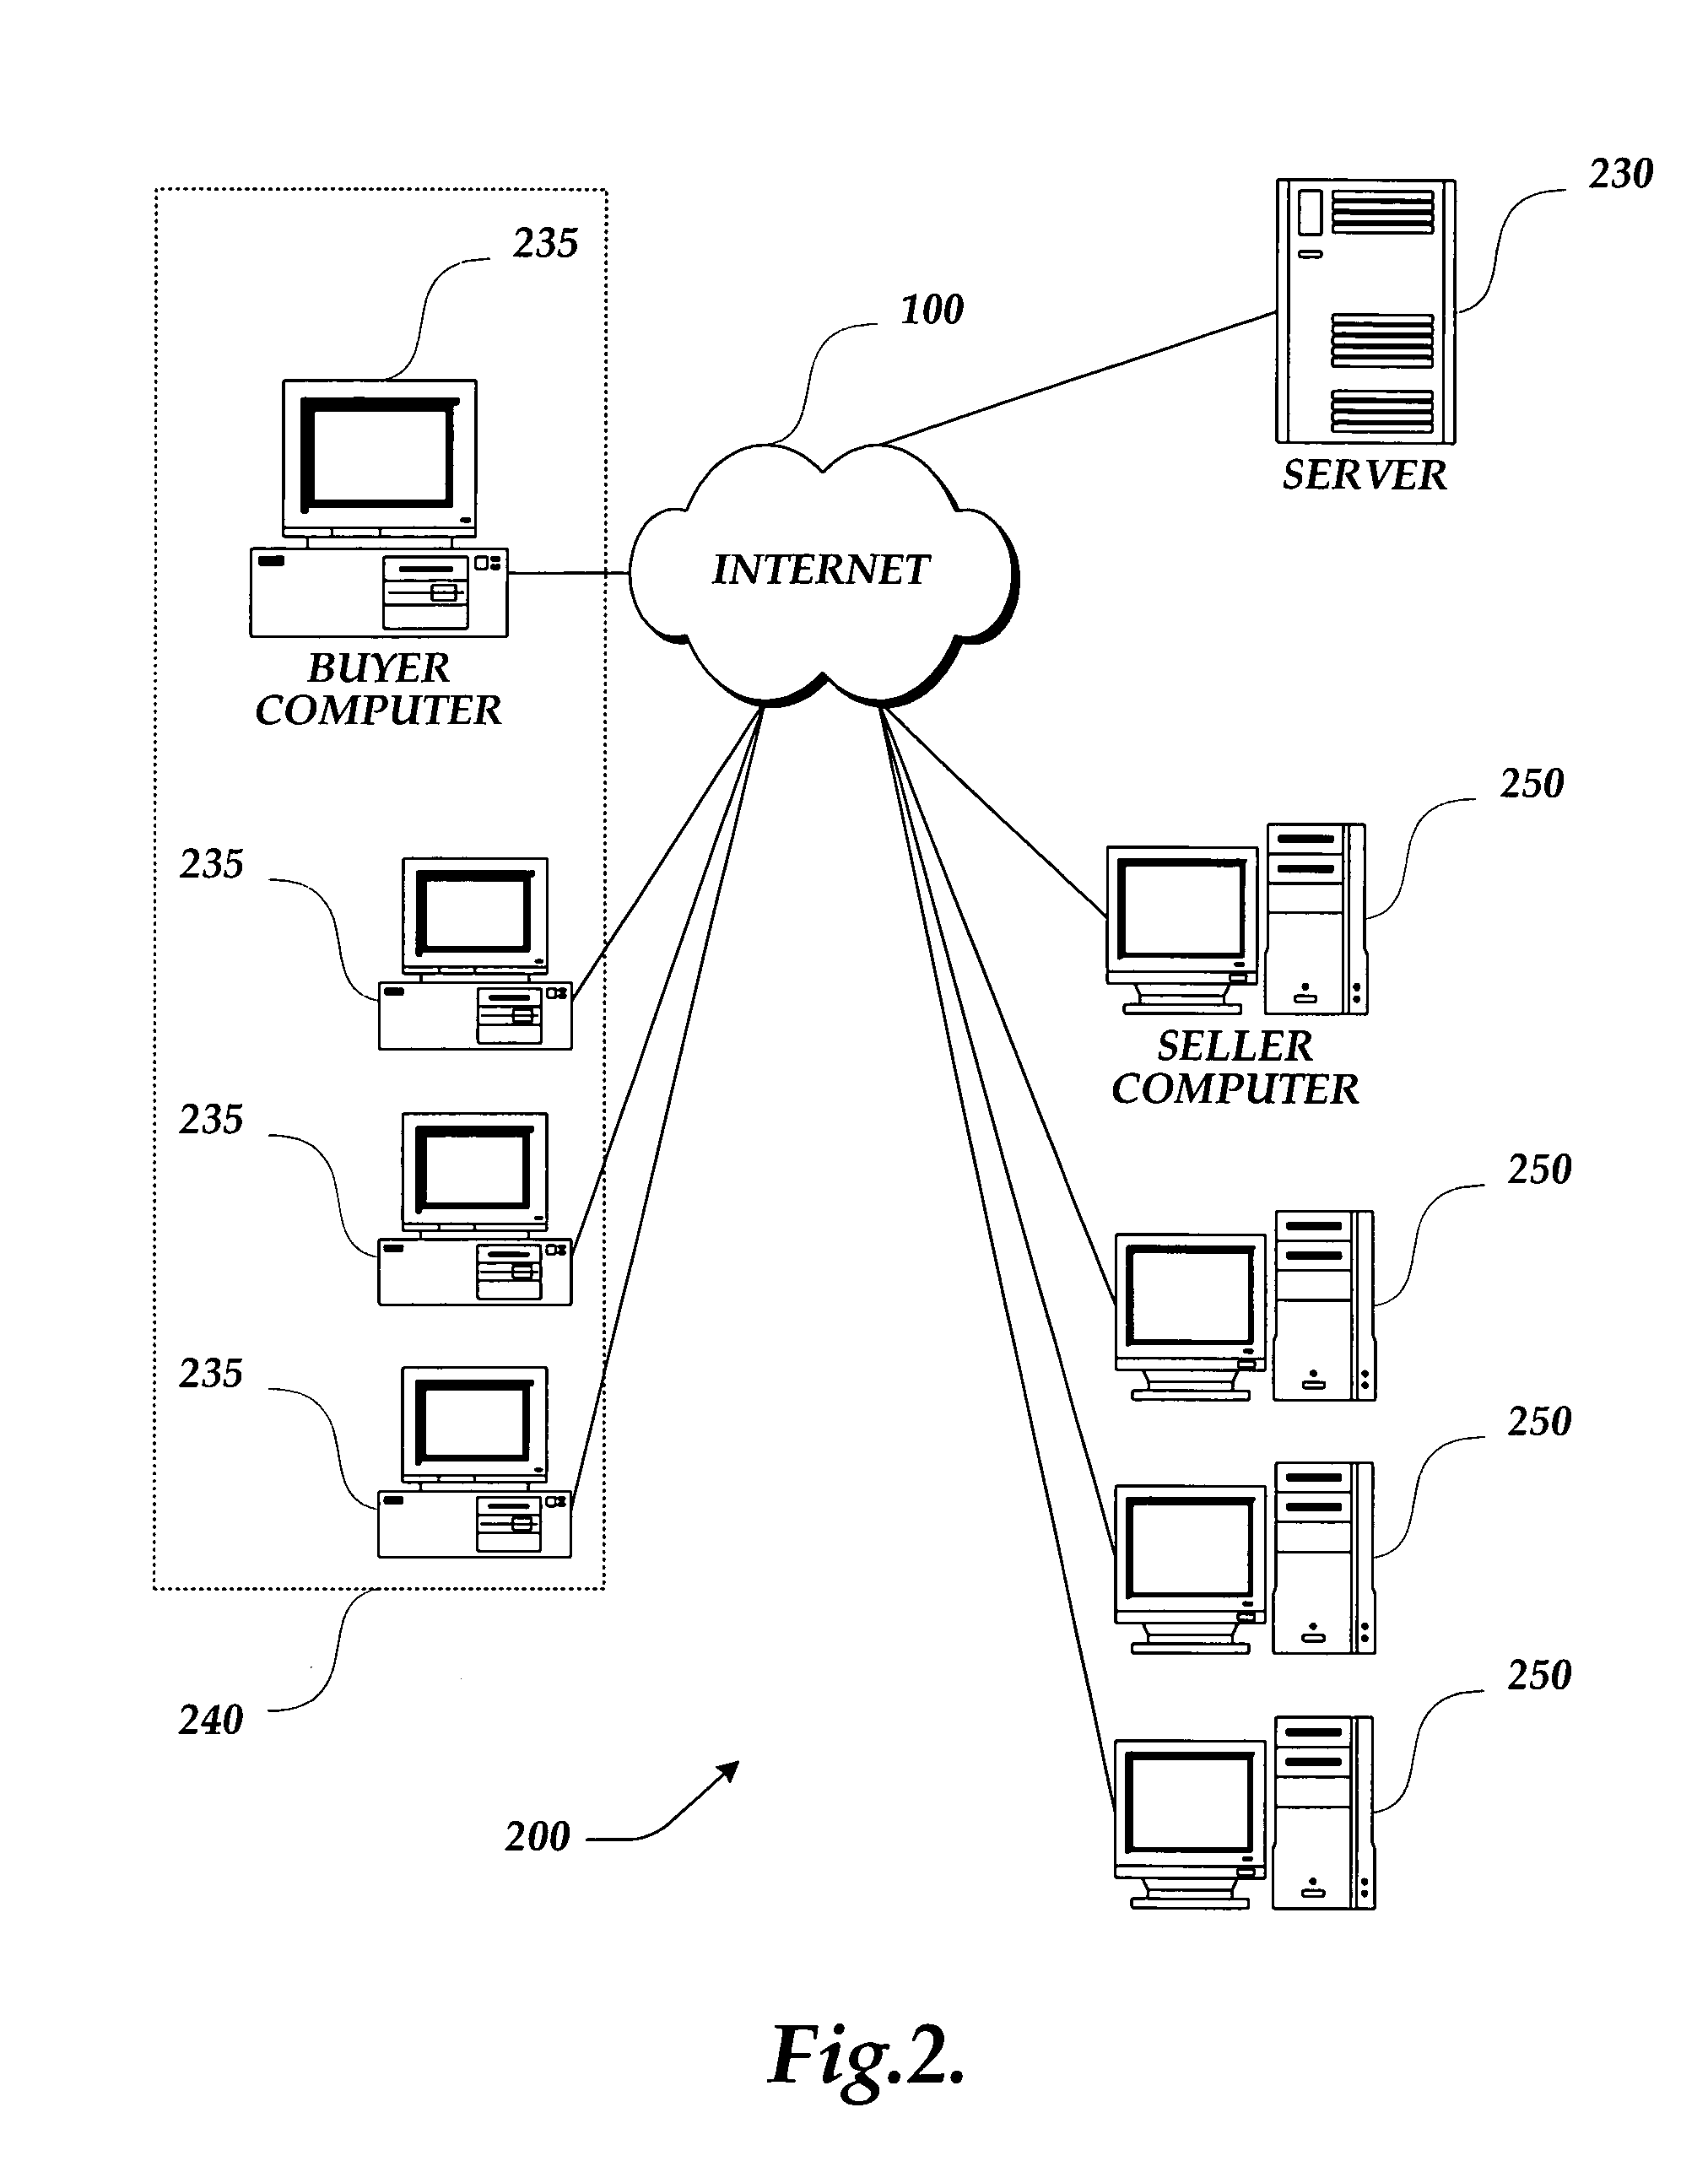 System and method for managing and evaluating network commodities purchasing